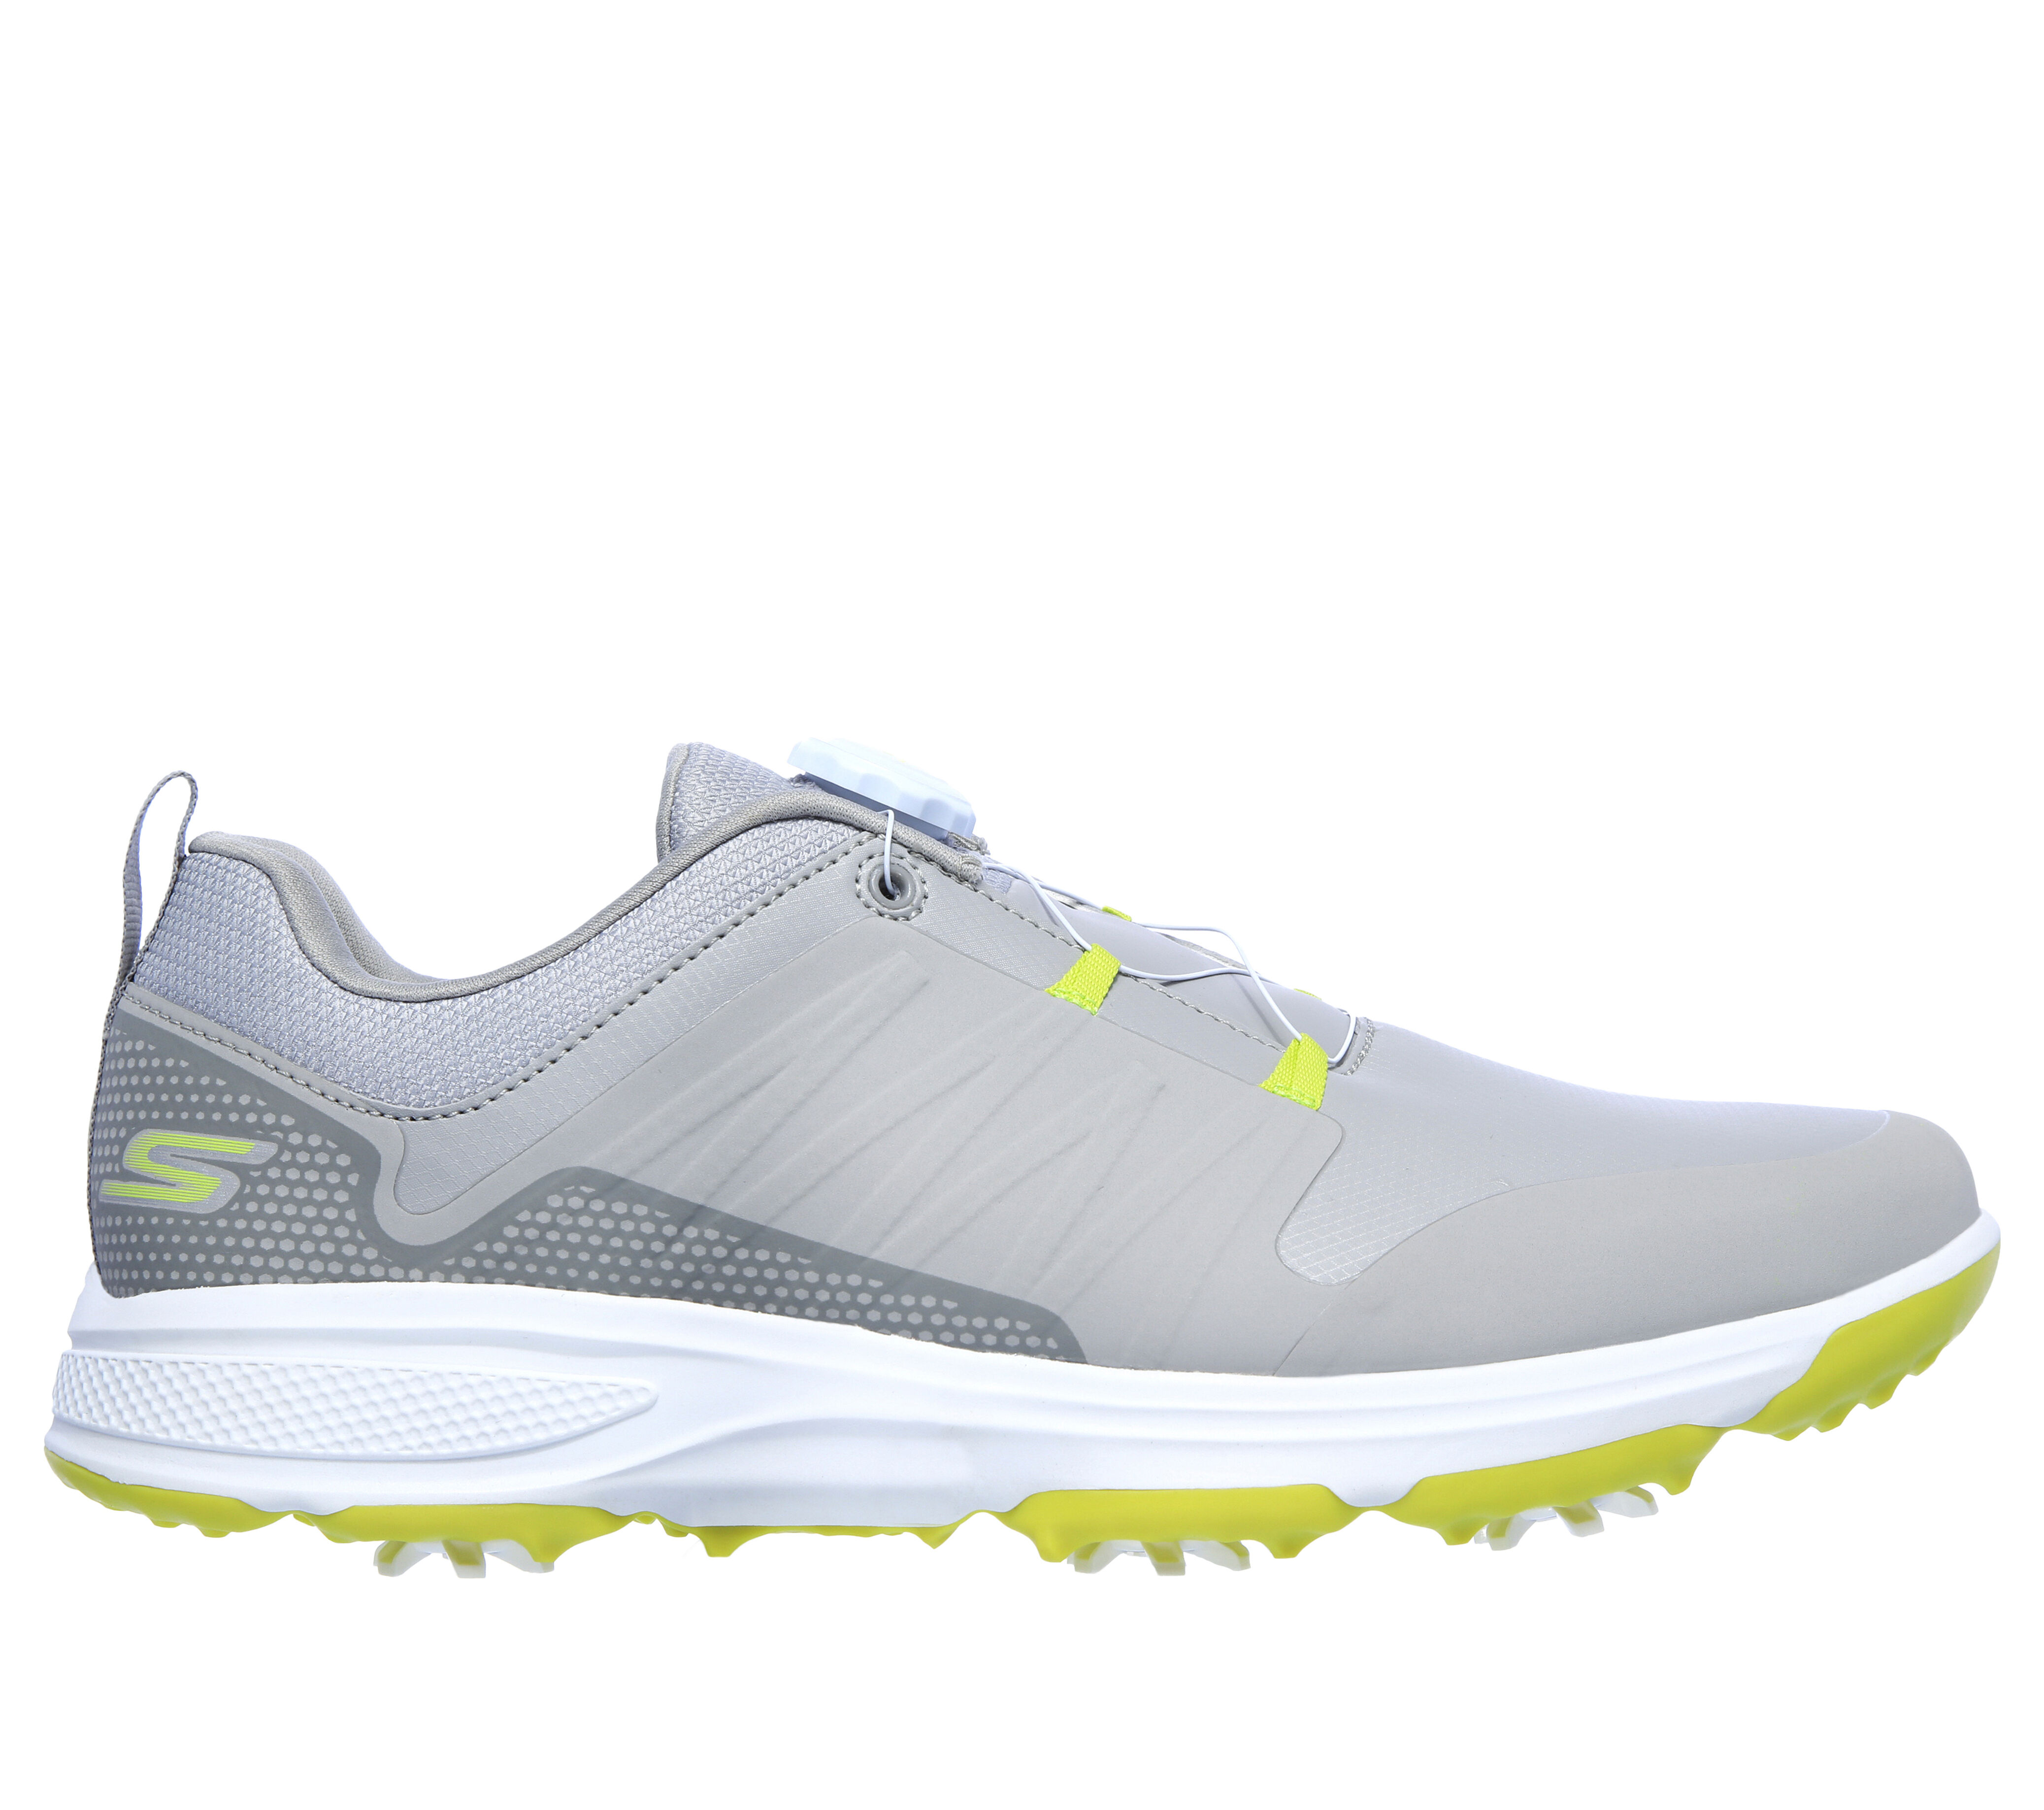 skechers extra wide mens golf shoes